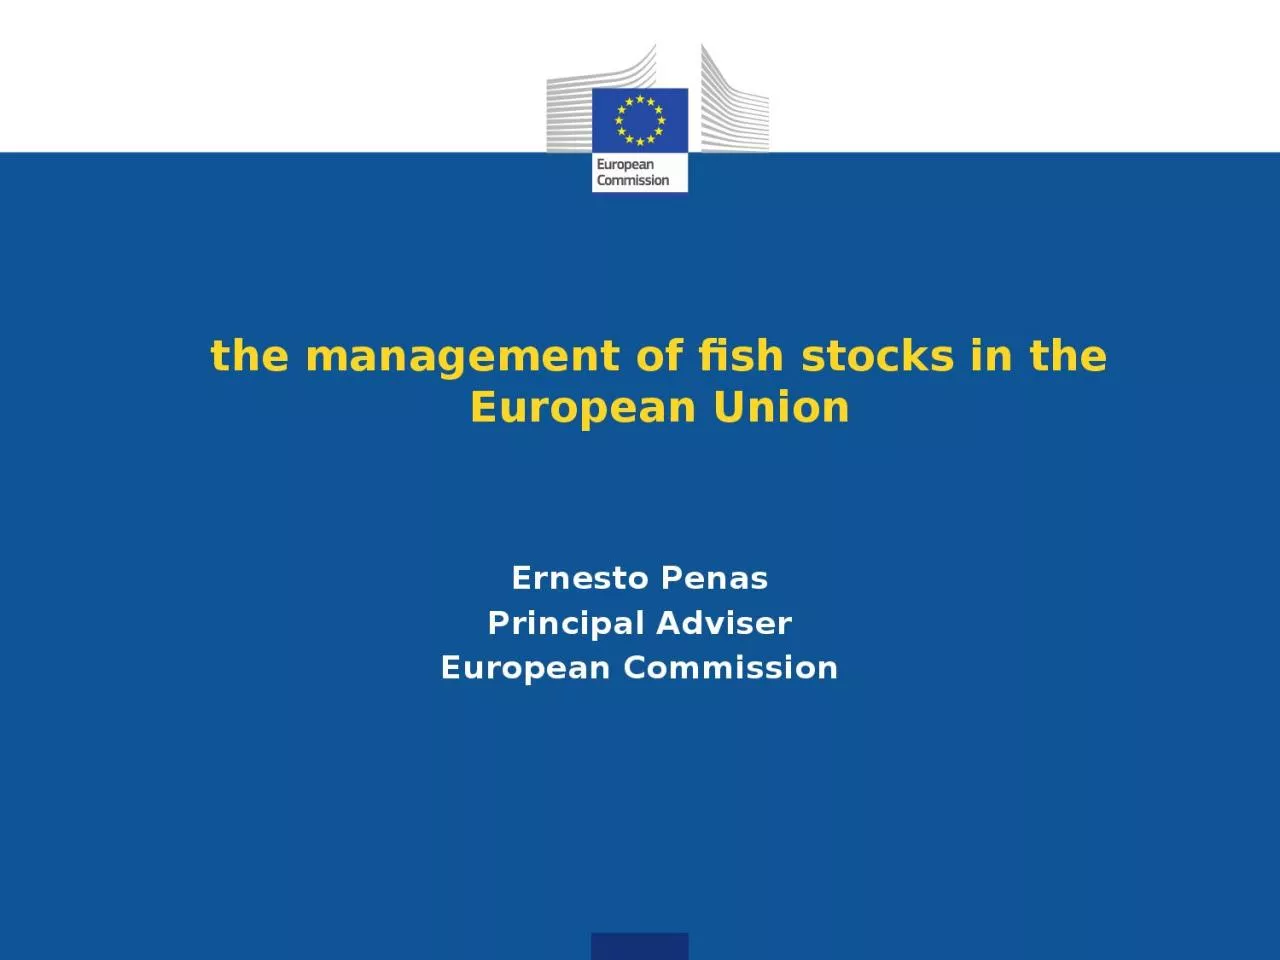 the management of fish stocks in the European Union